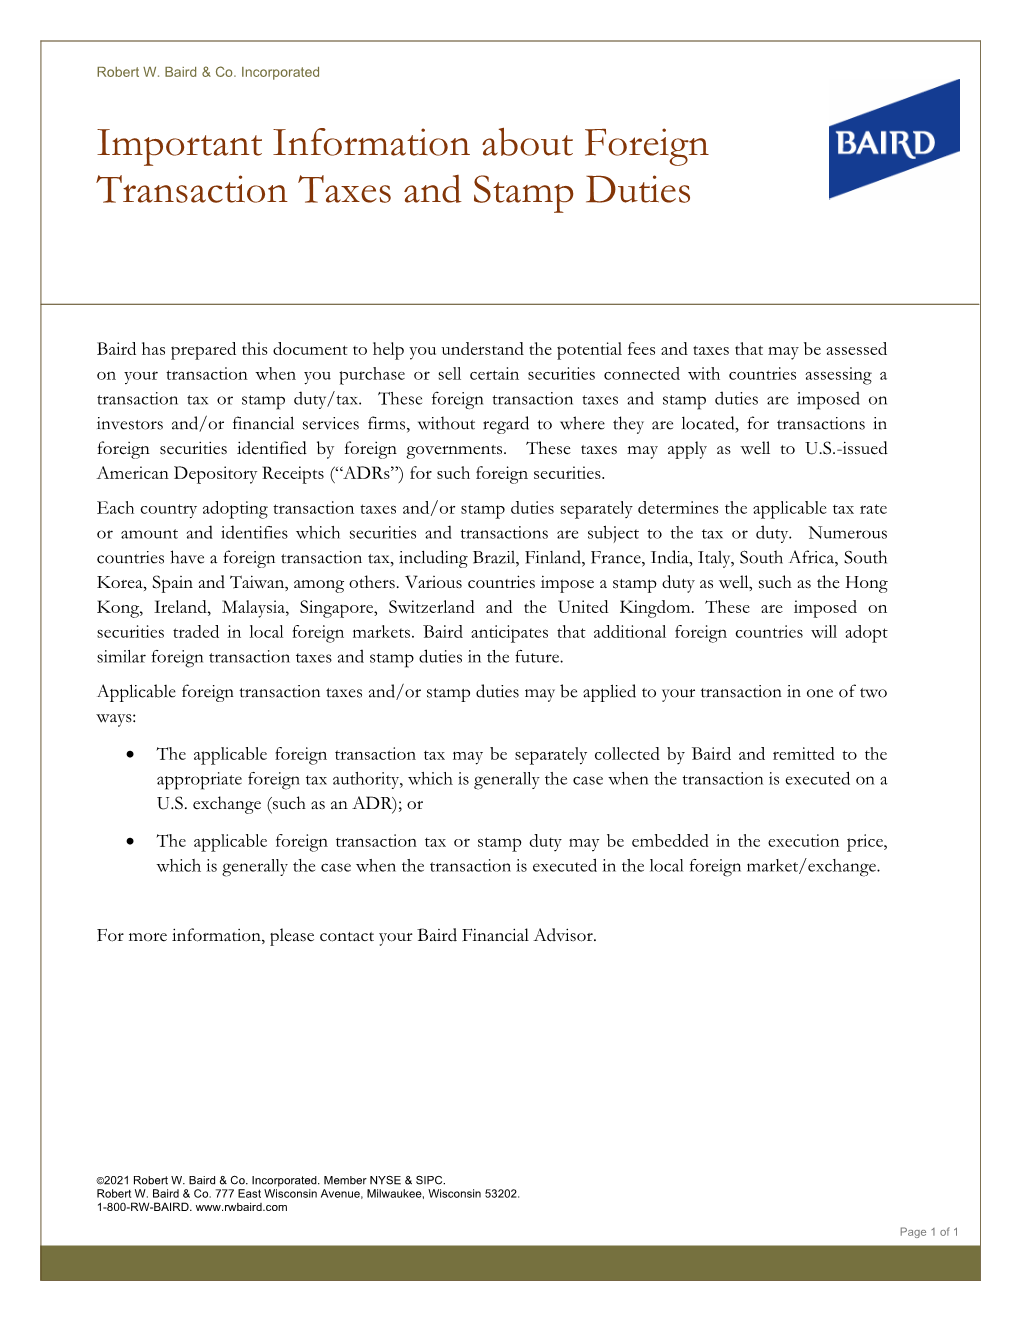 Important Information About Foreign Transaction Taxes and Stamp Duties